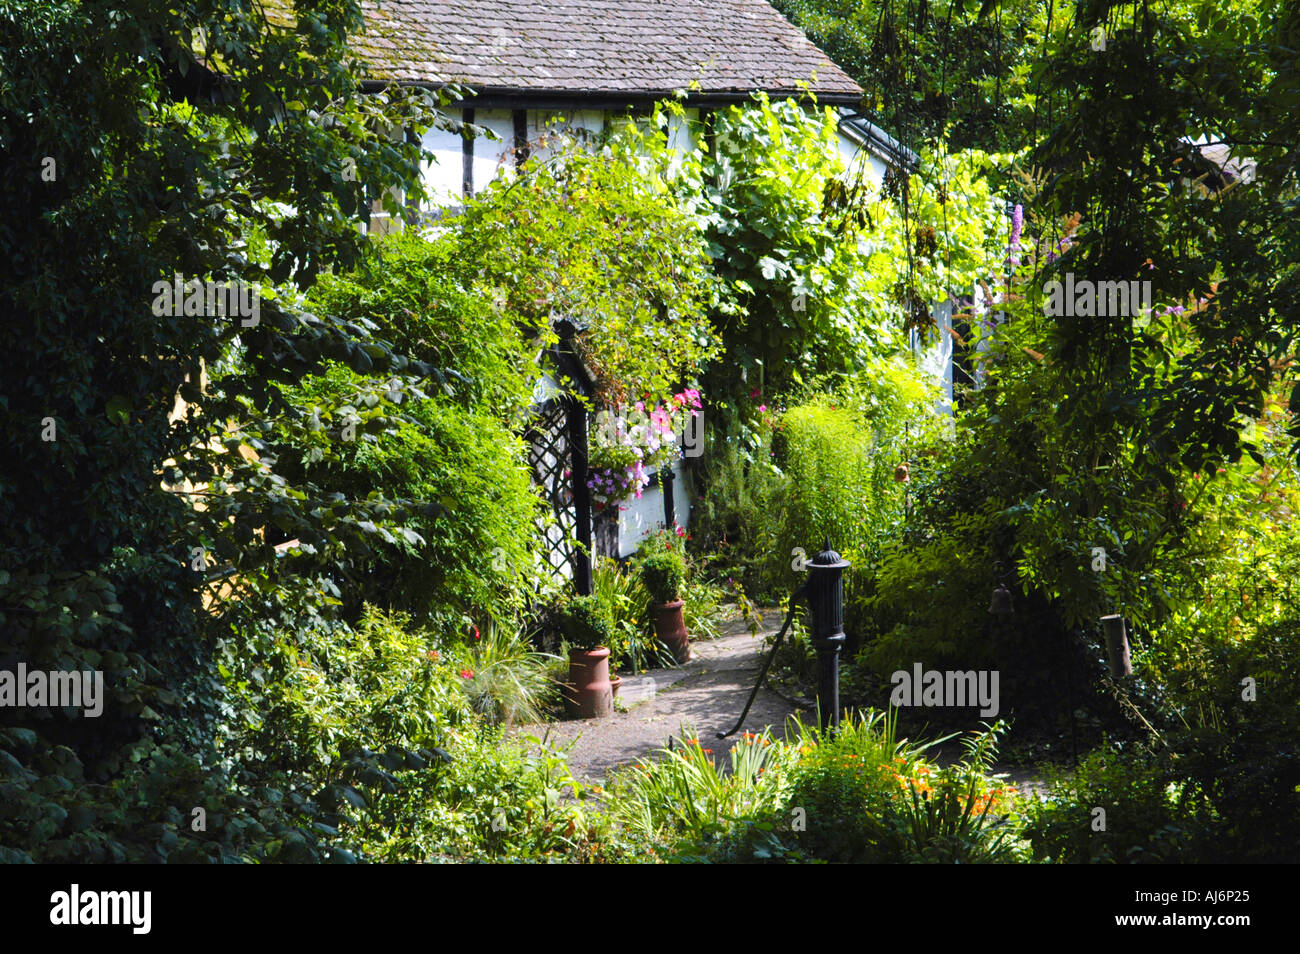 Pretty Timber Framed Cottage In The Picturesque English Village Of